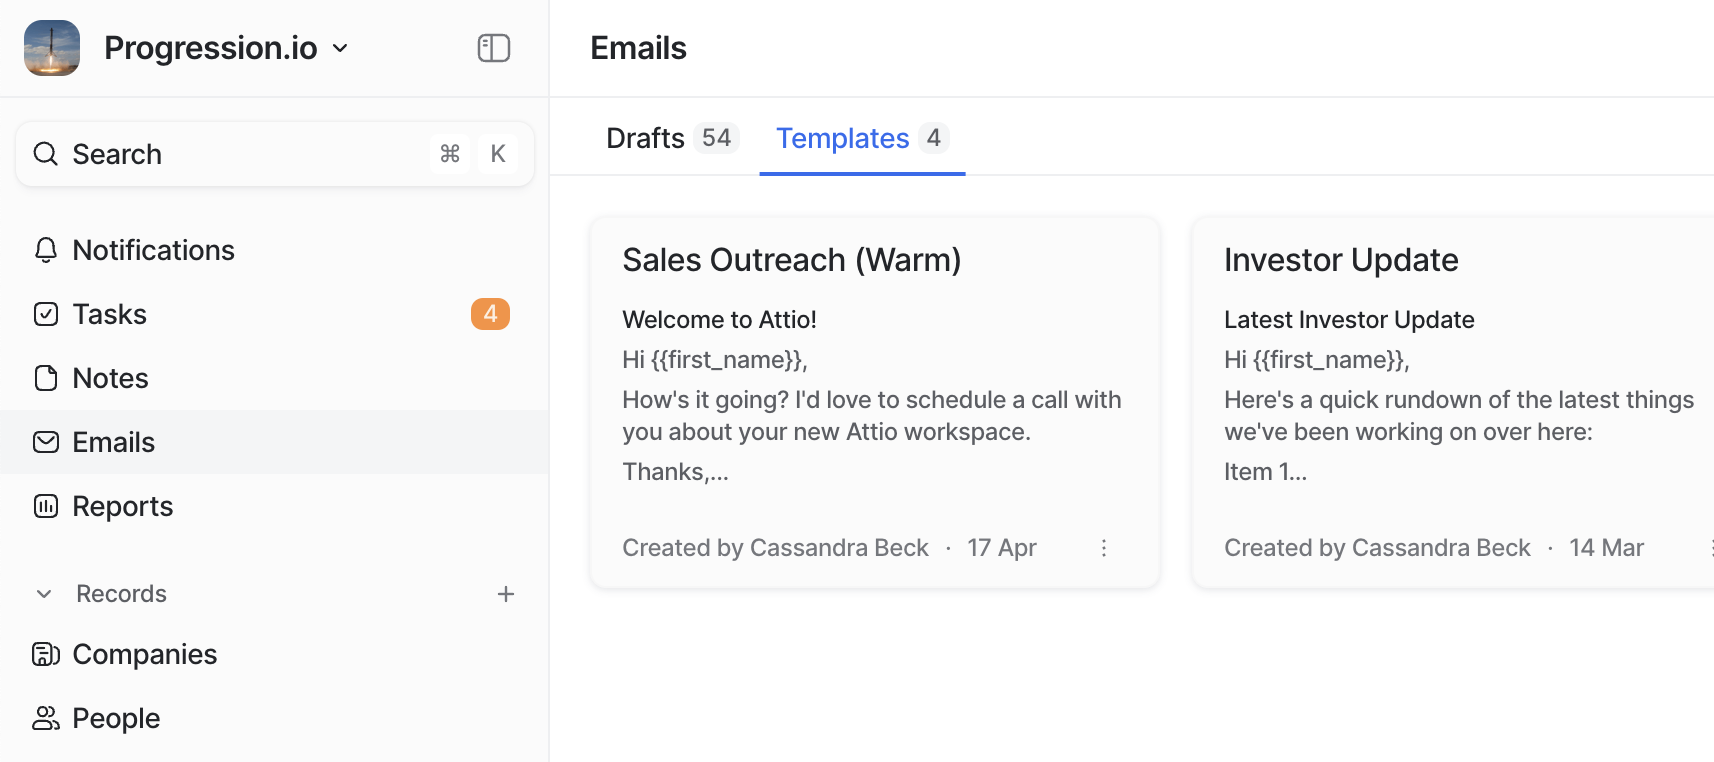 Emails page showing Drafts and Templates tabs with some email templates listed 